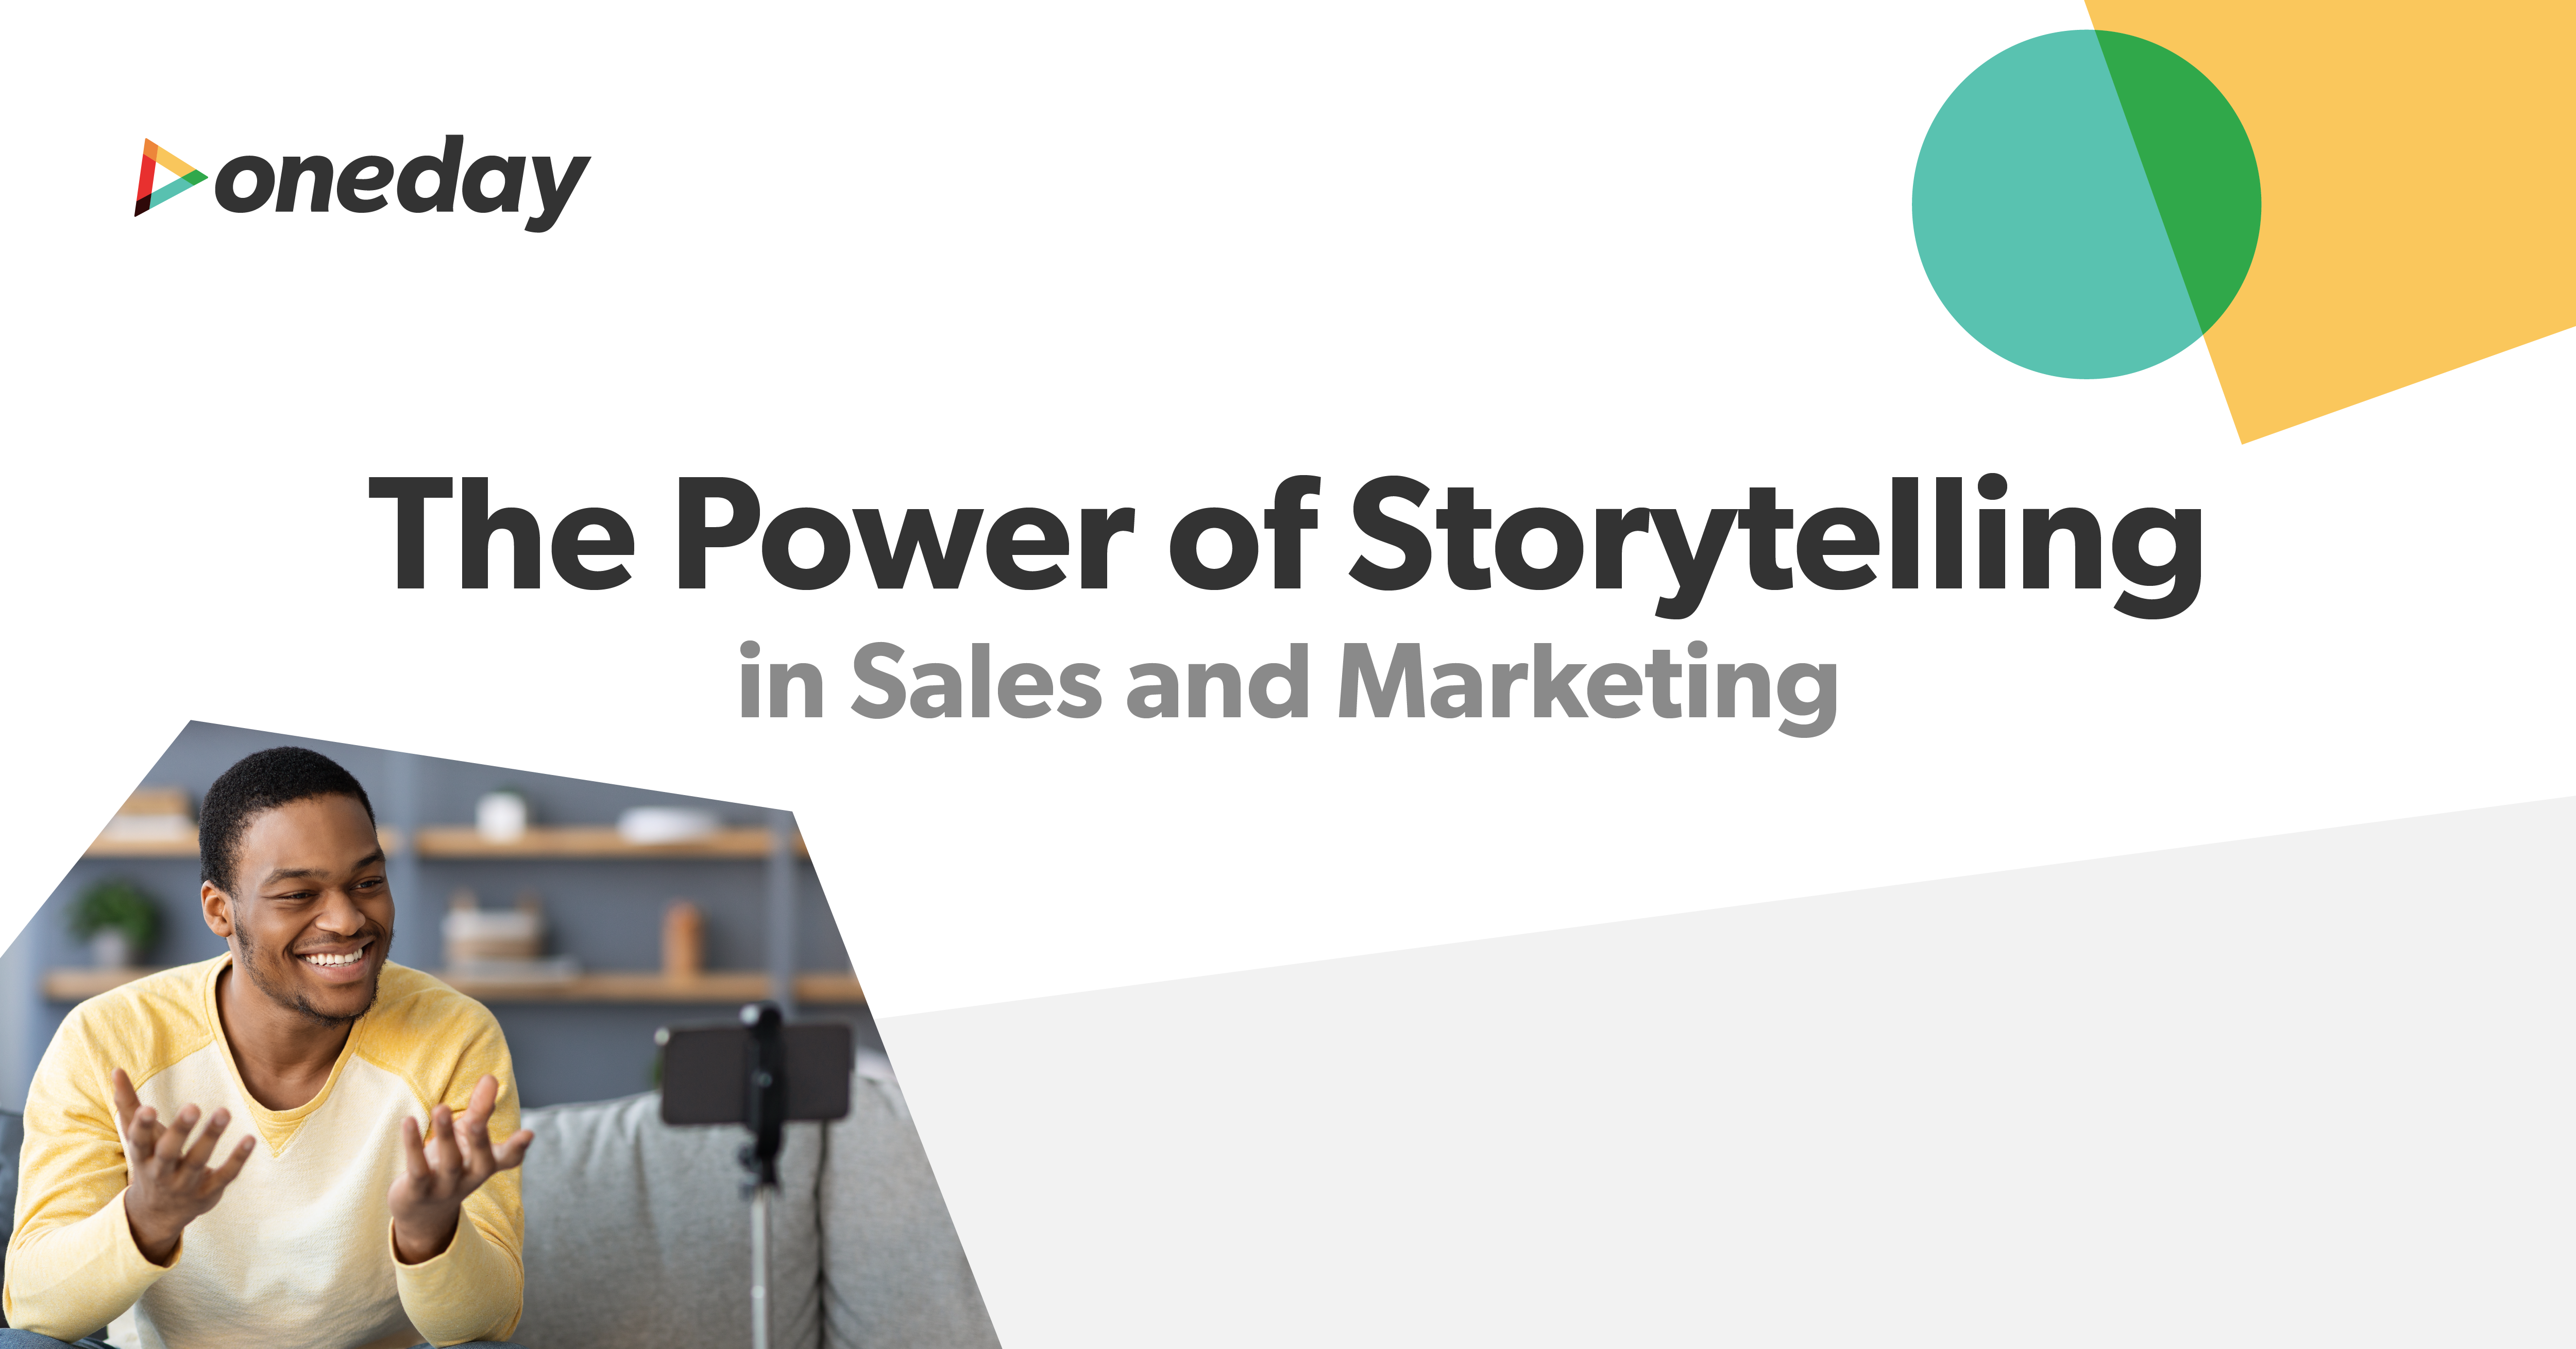 A look at what makes storytelling such a potent tool for sales and marketing teams trying to differentiate their organizations and drive conversions.